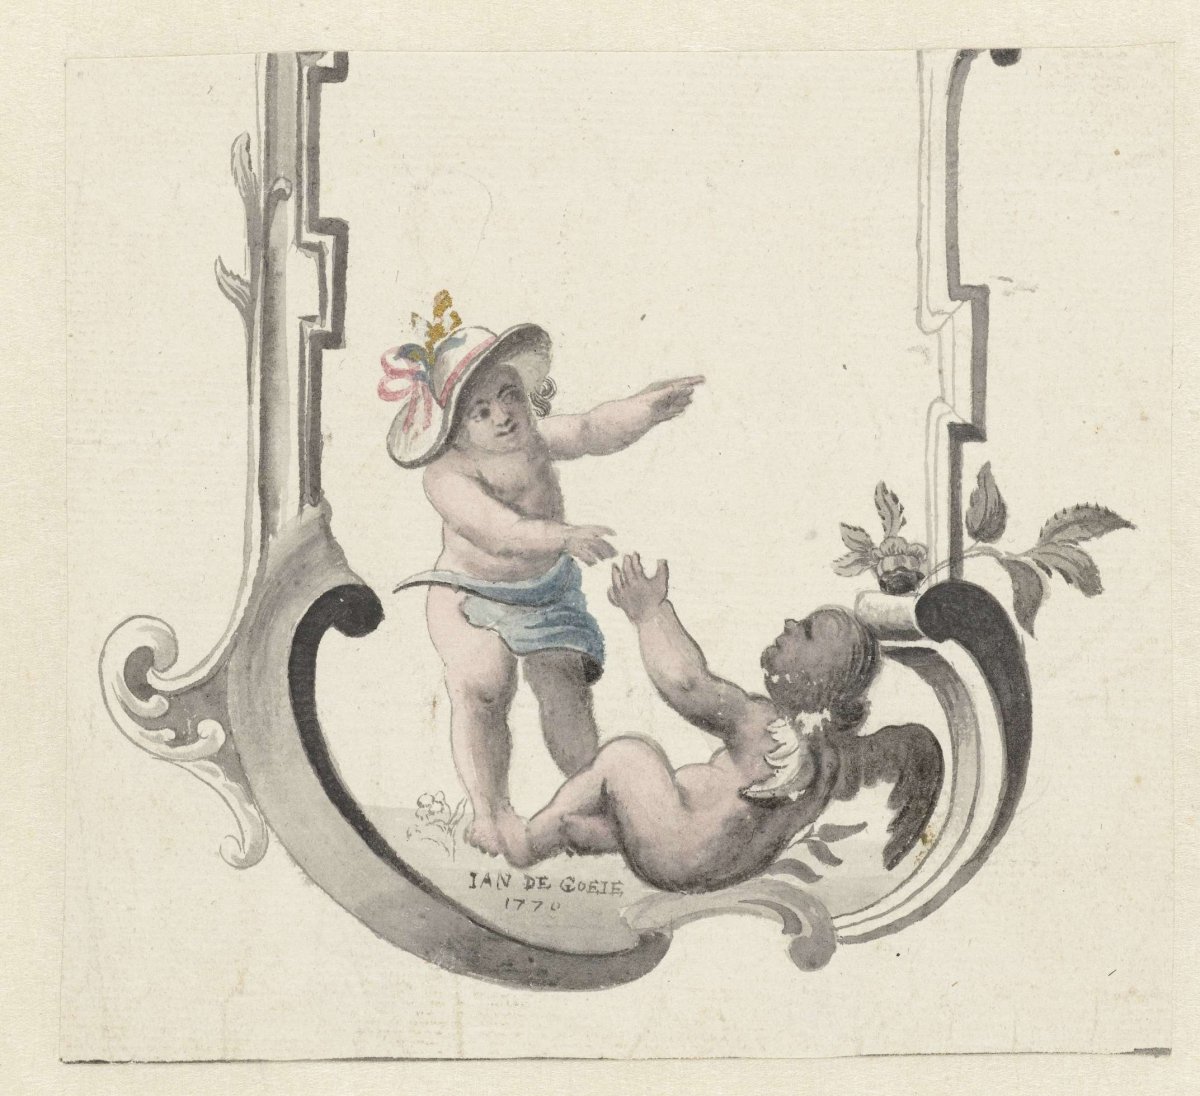 Ornament with two putti playing, Jan de Goeje, 1770